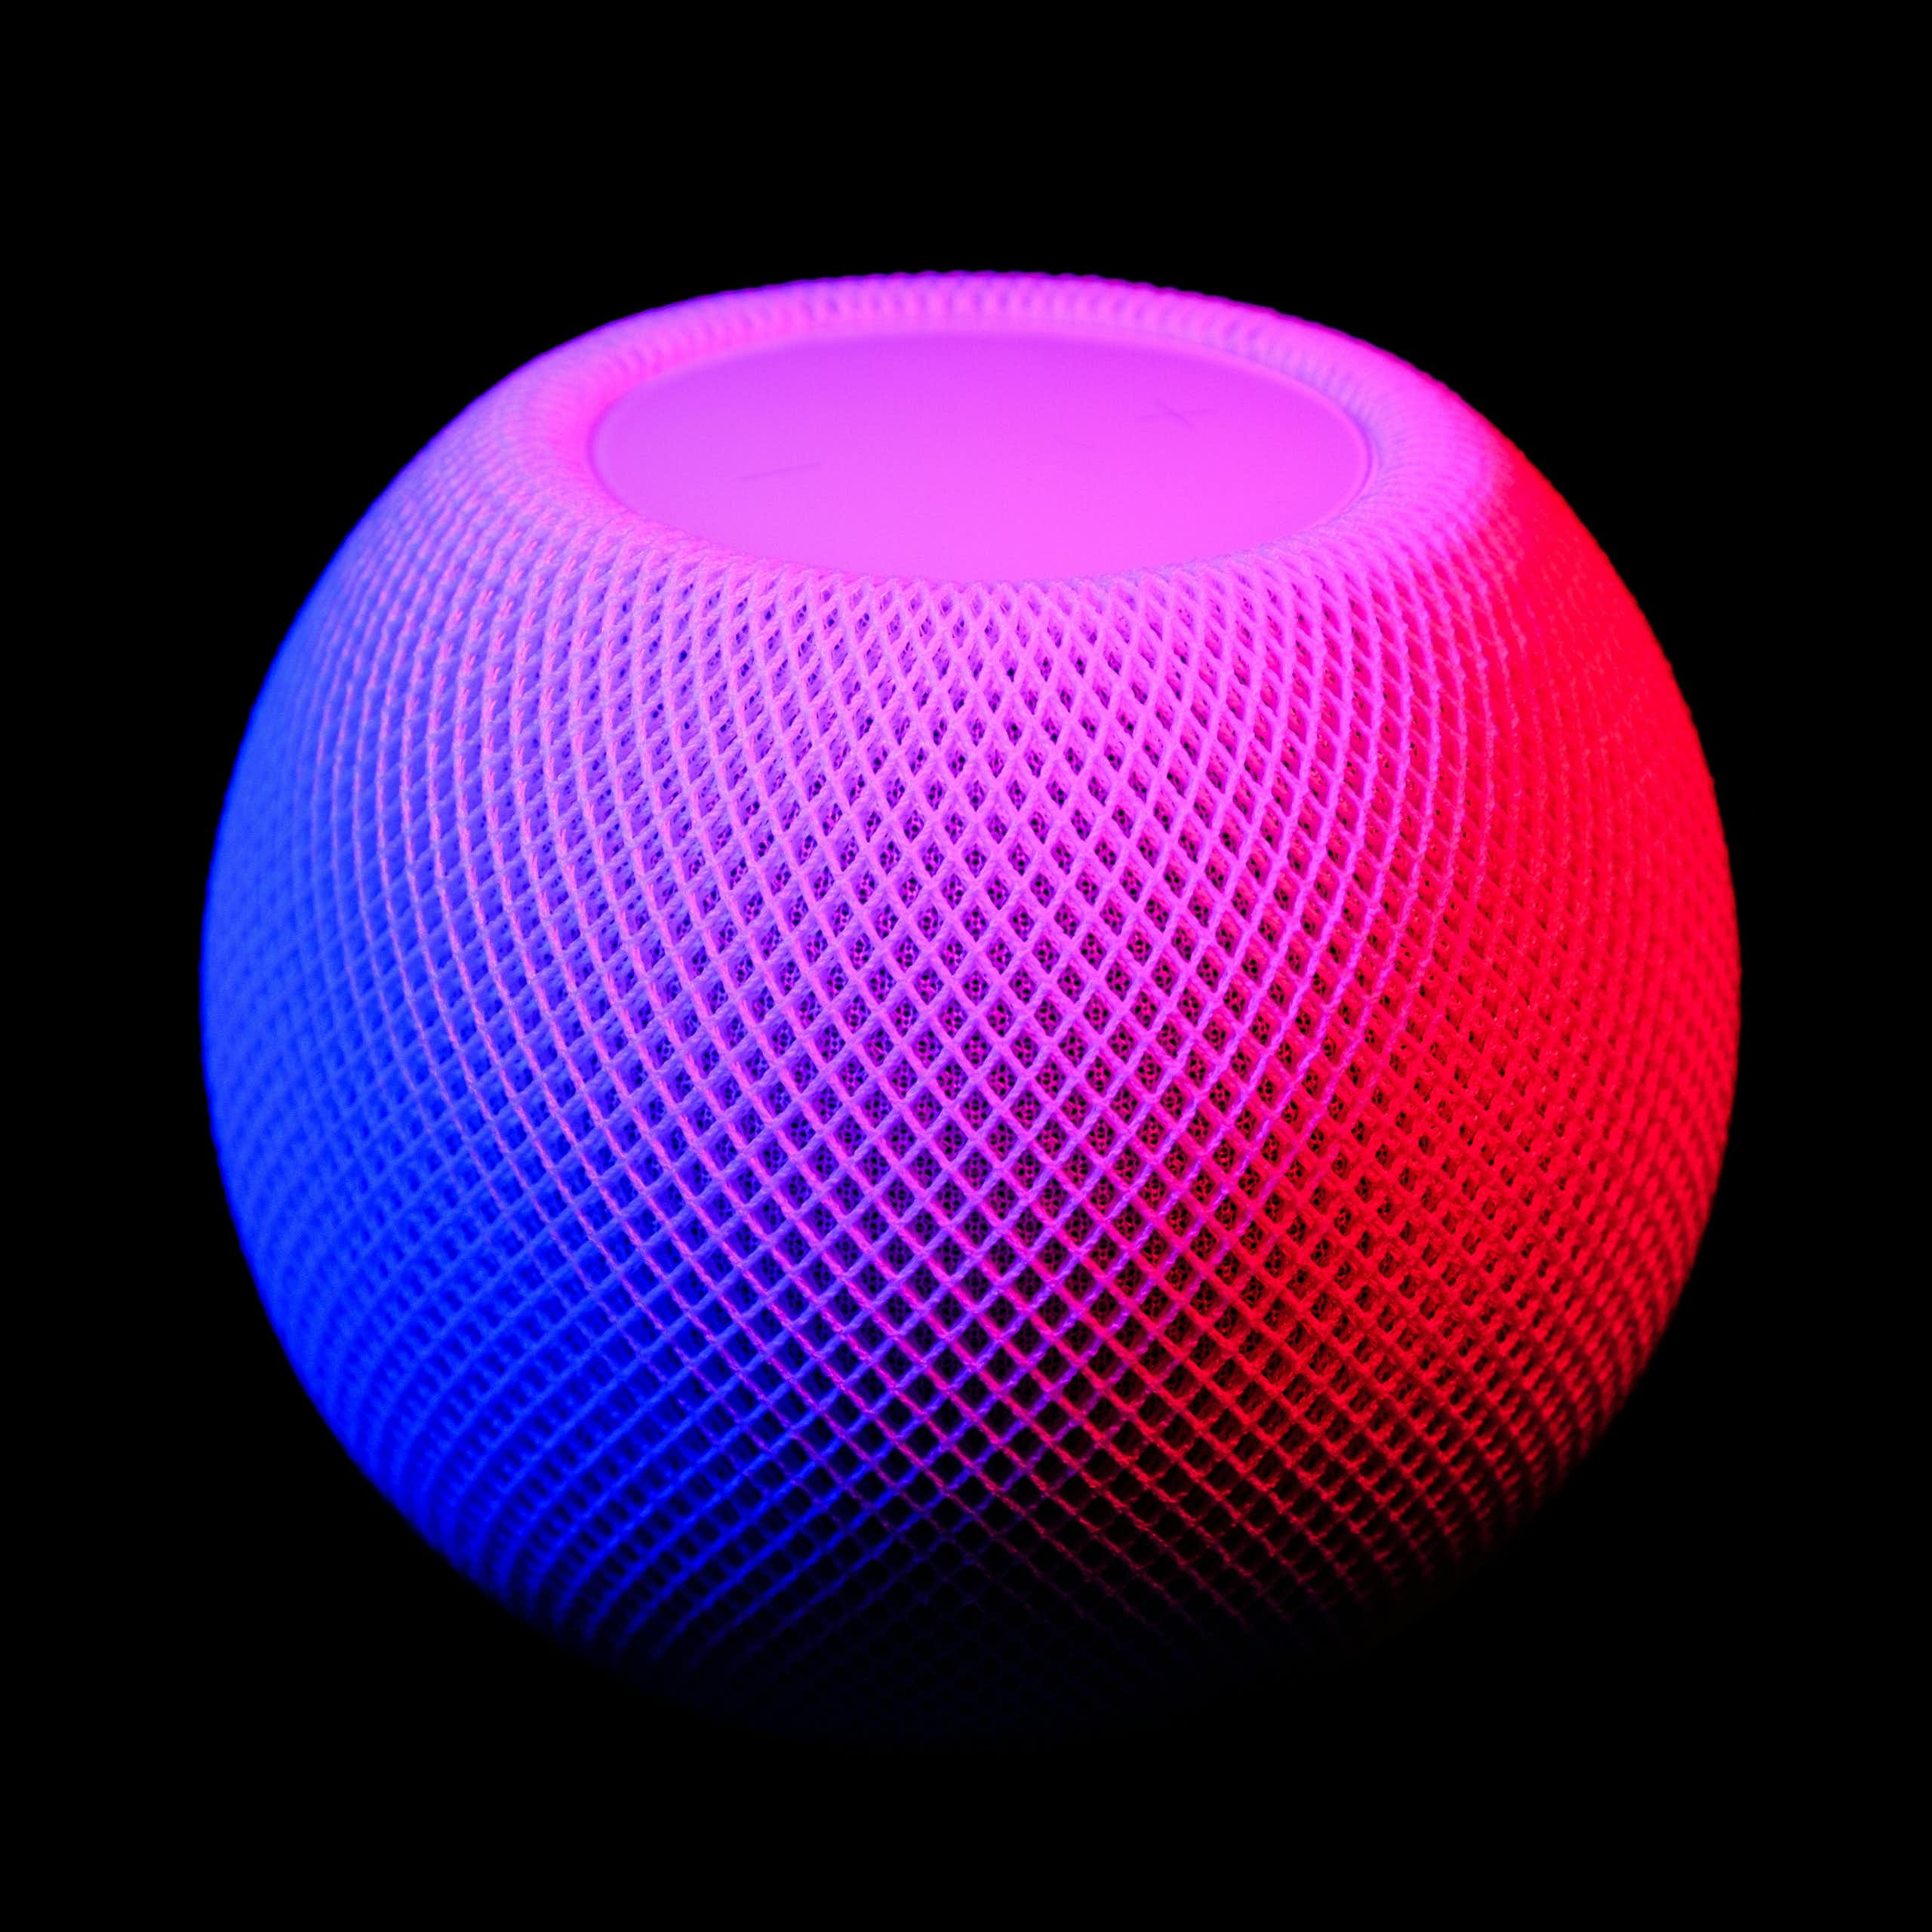 A round mesh pod in blue and red lighting on a black background.